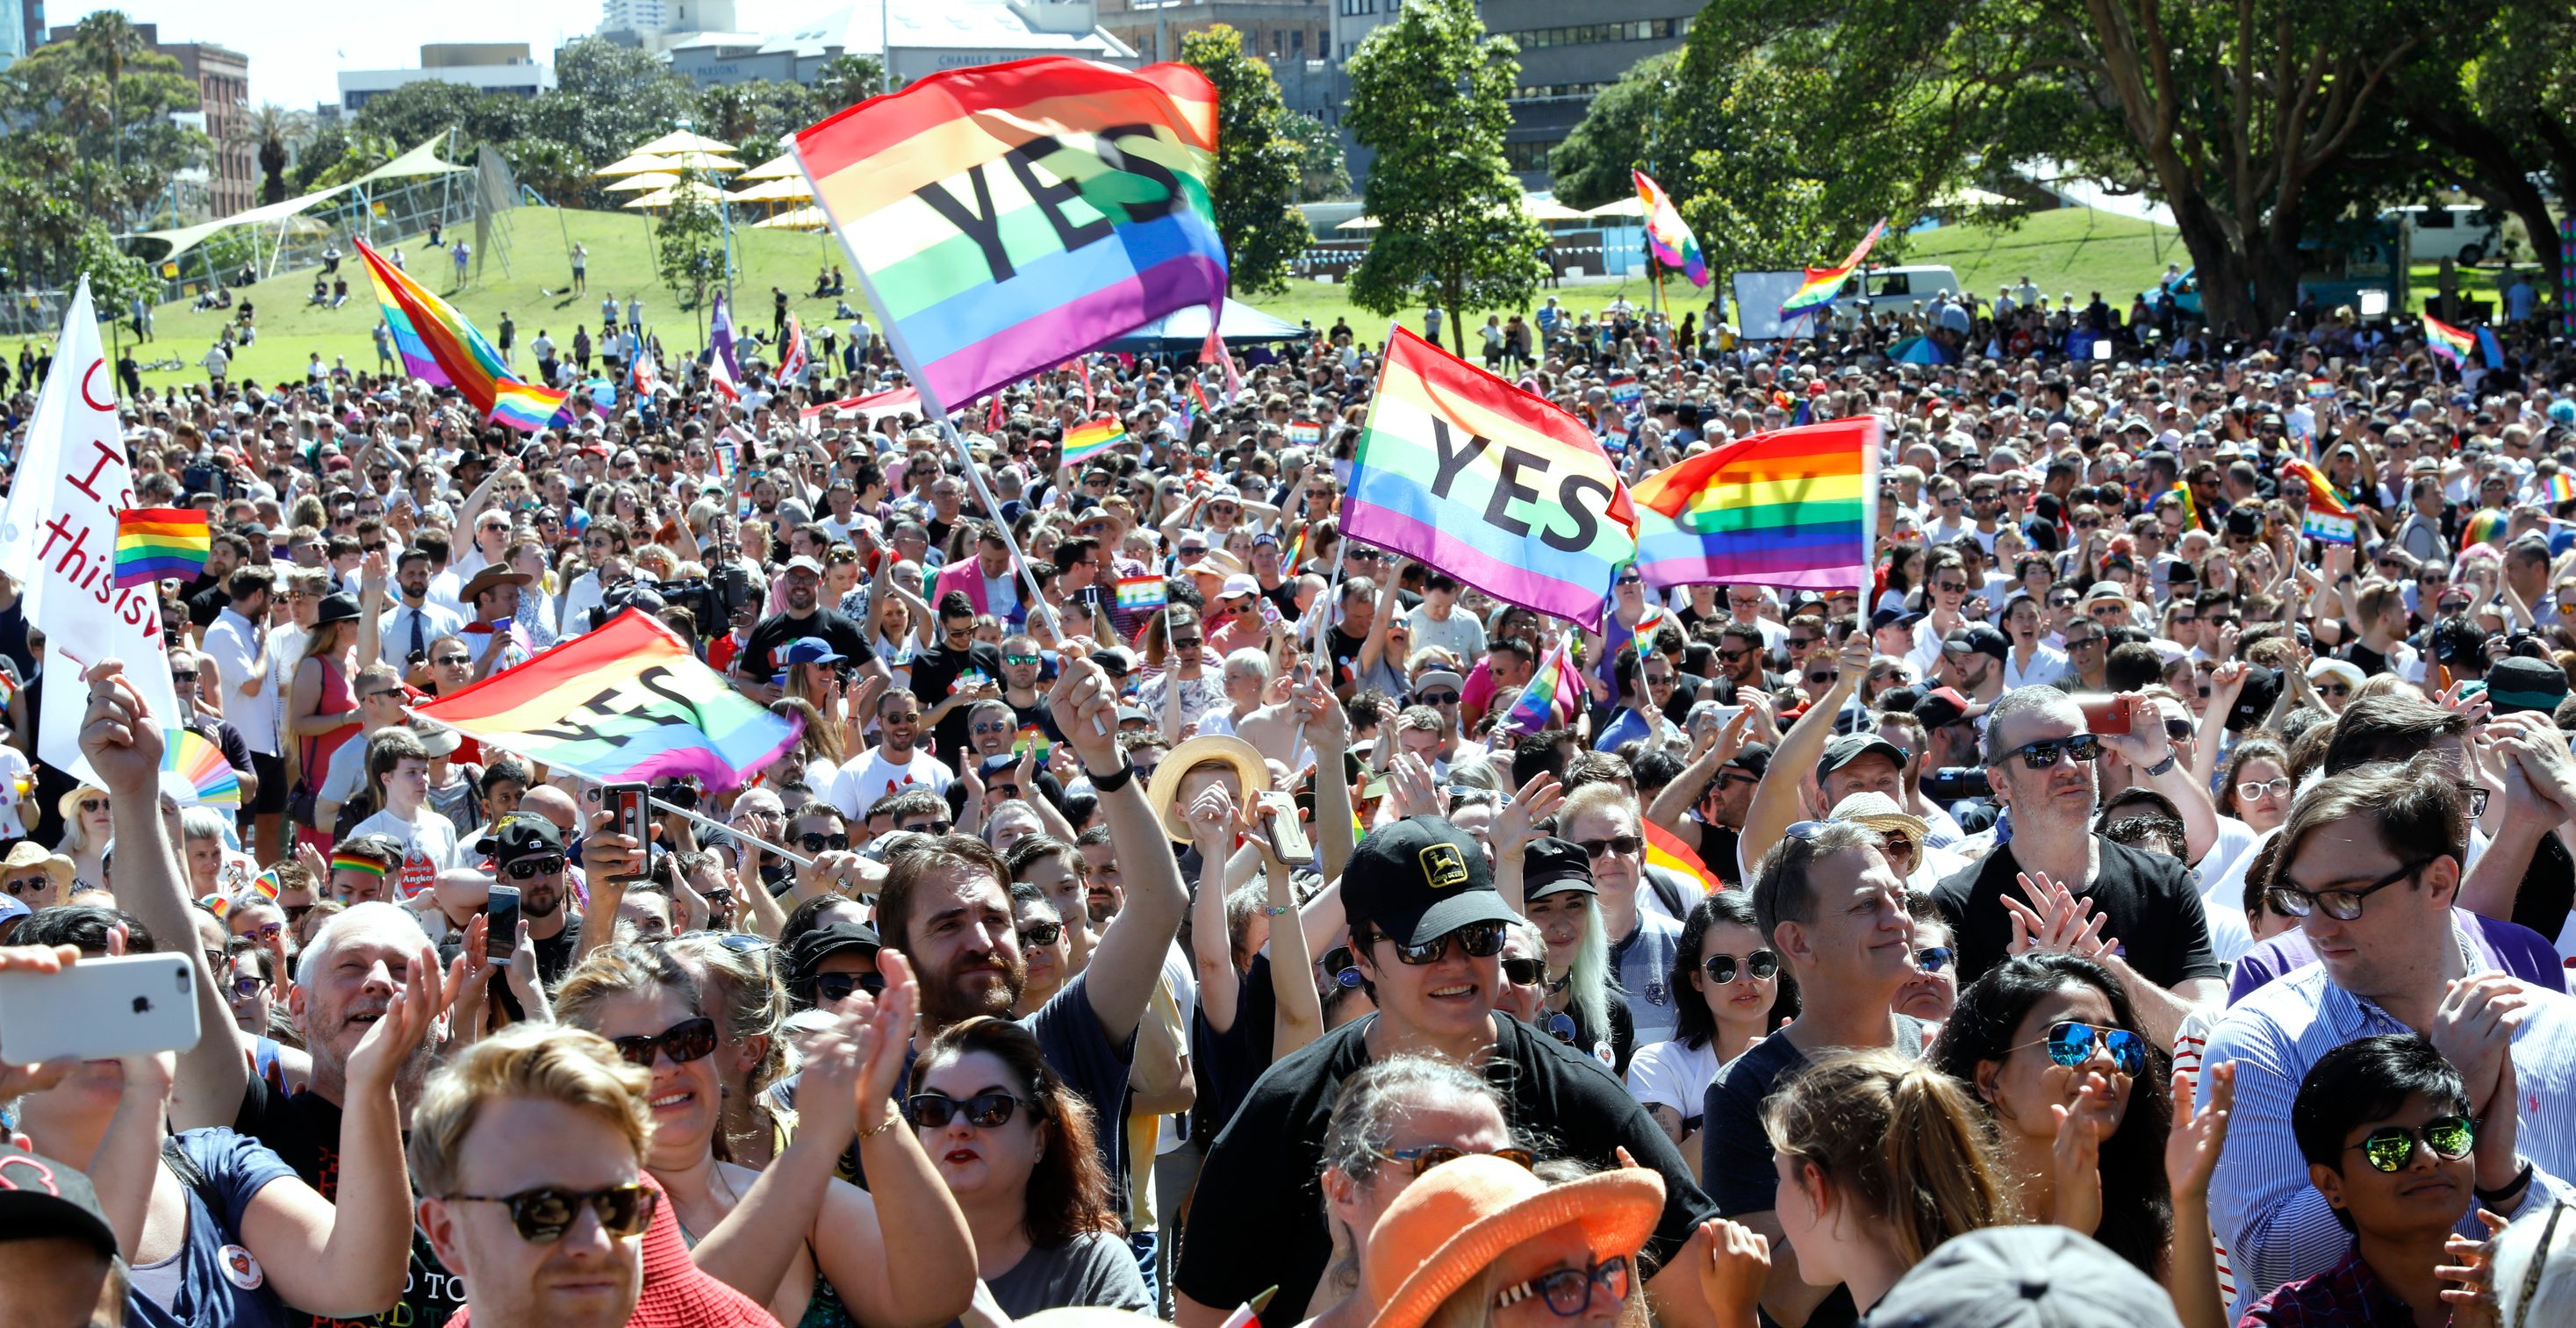 Prince Alfred Park lawn will be renamed ‘Equality Green’ to commemorate Yes vote